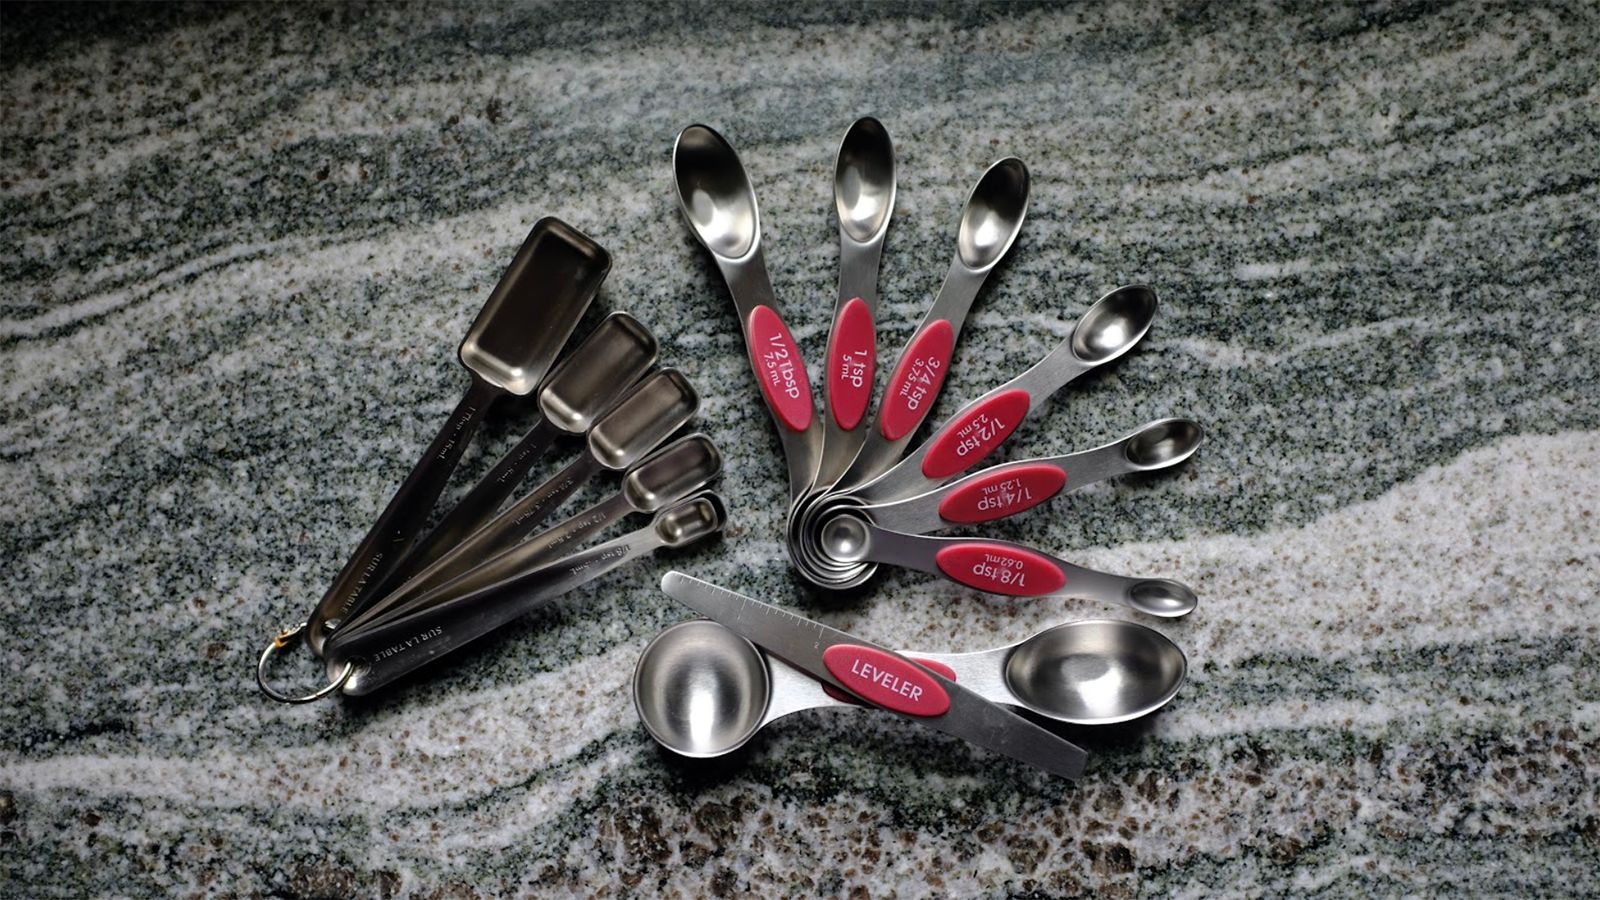 Stainless Steel Odd-Sized Measuring Cups & Spoons, 6 Piece Set